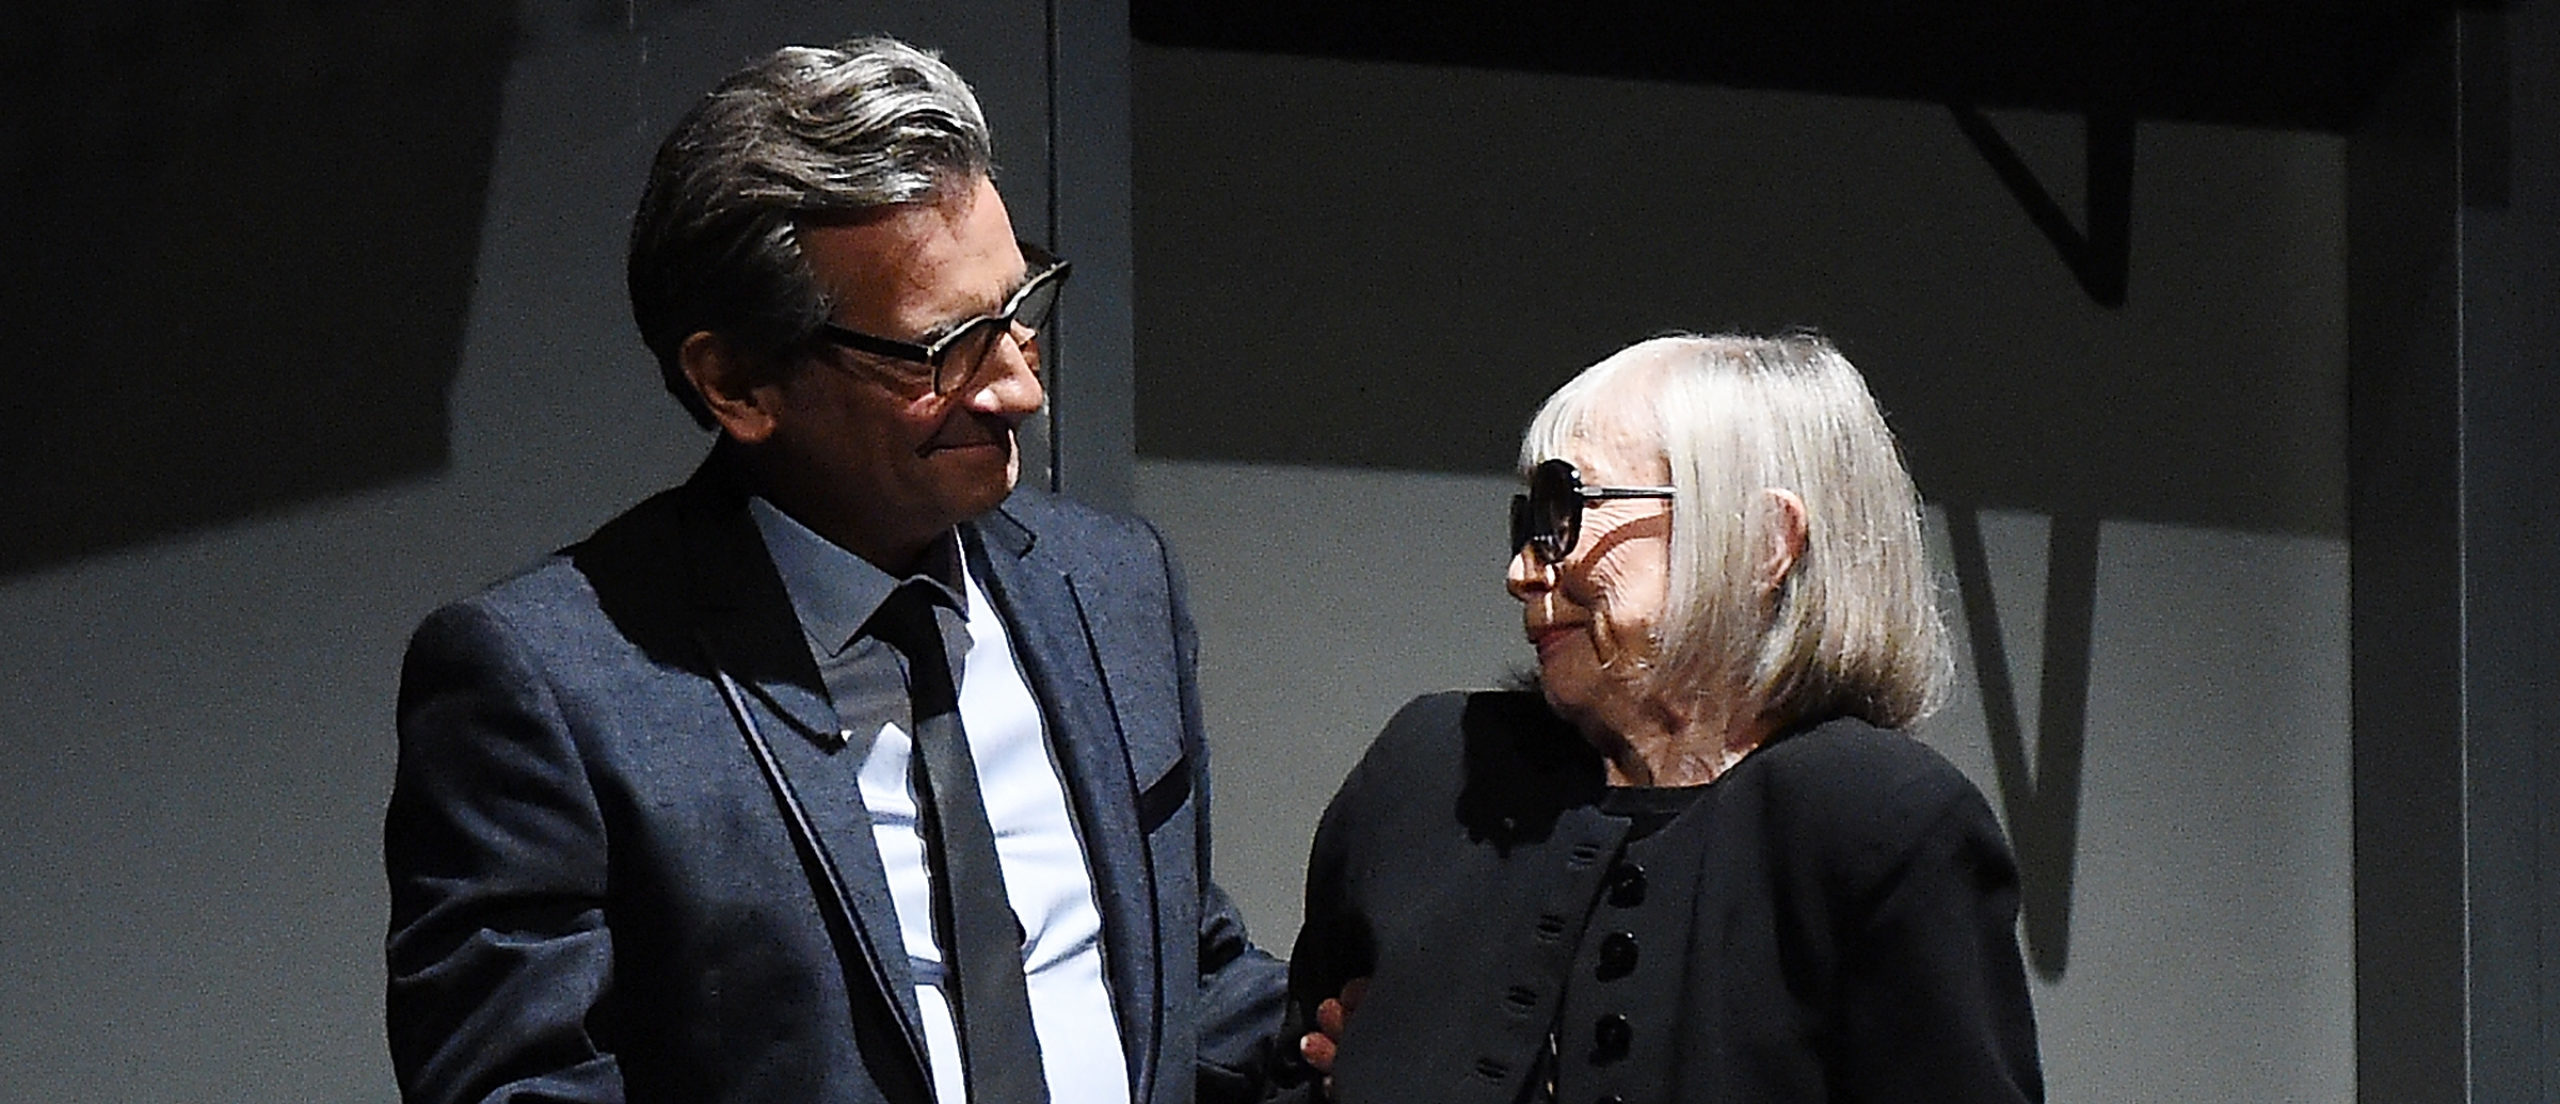 NEW YORK, NY - OCTOBER 11: Director Griffin Dunne and Writer Joan Didion attend the 55th New York Film Festival presentation of - "Joan Didion: The Center Will Not Hold" at Alice Tully Hall on October 11, 2017 in New York City. (Photo by Nicholas Hunt/Getty Images)